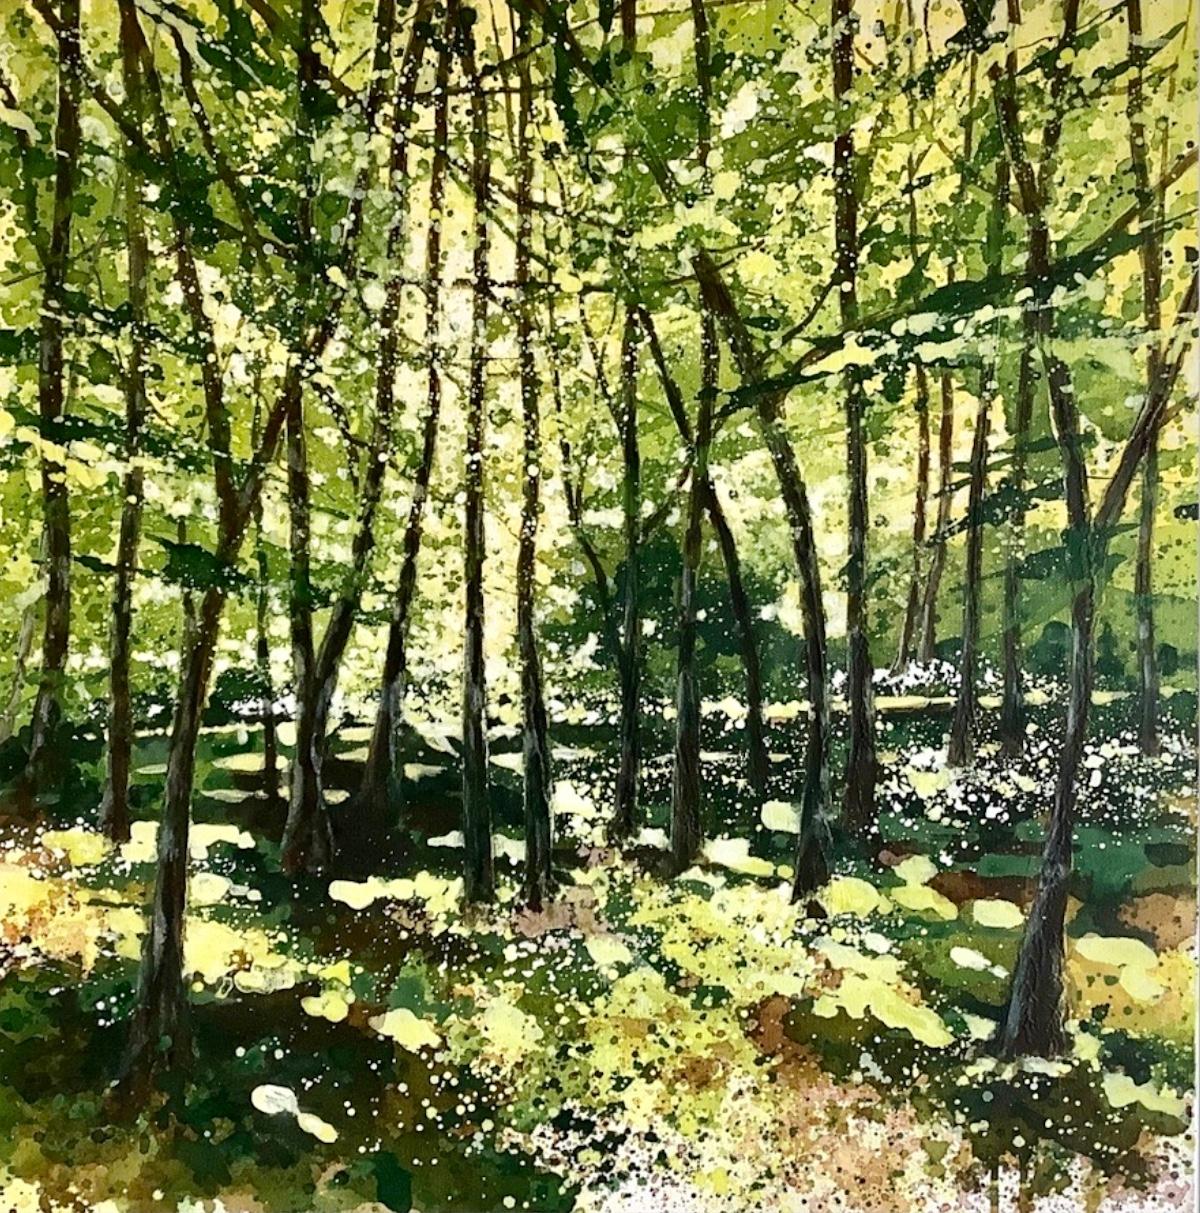 Dappled Earth by Adele Riley [2022]
original and hand signed by the artist 
Acrylic and acrylic inks on boxed canvas
Image size: H:60 cm x W:60 cm
Complete Size of Unframed Work: H:60 cm x W:60 cm x D:5cm
Frame Size: H:65 cm x W:65 cm x D:8cm
Sold